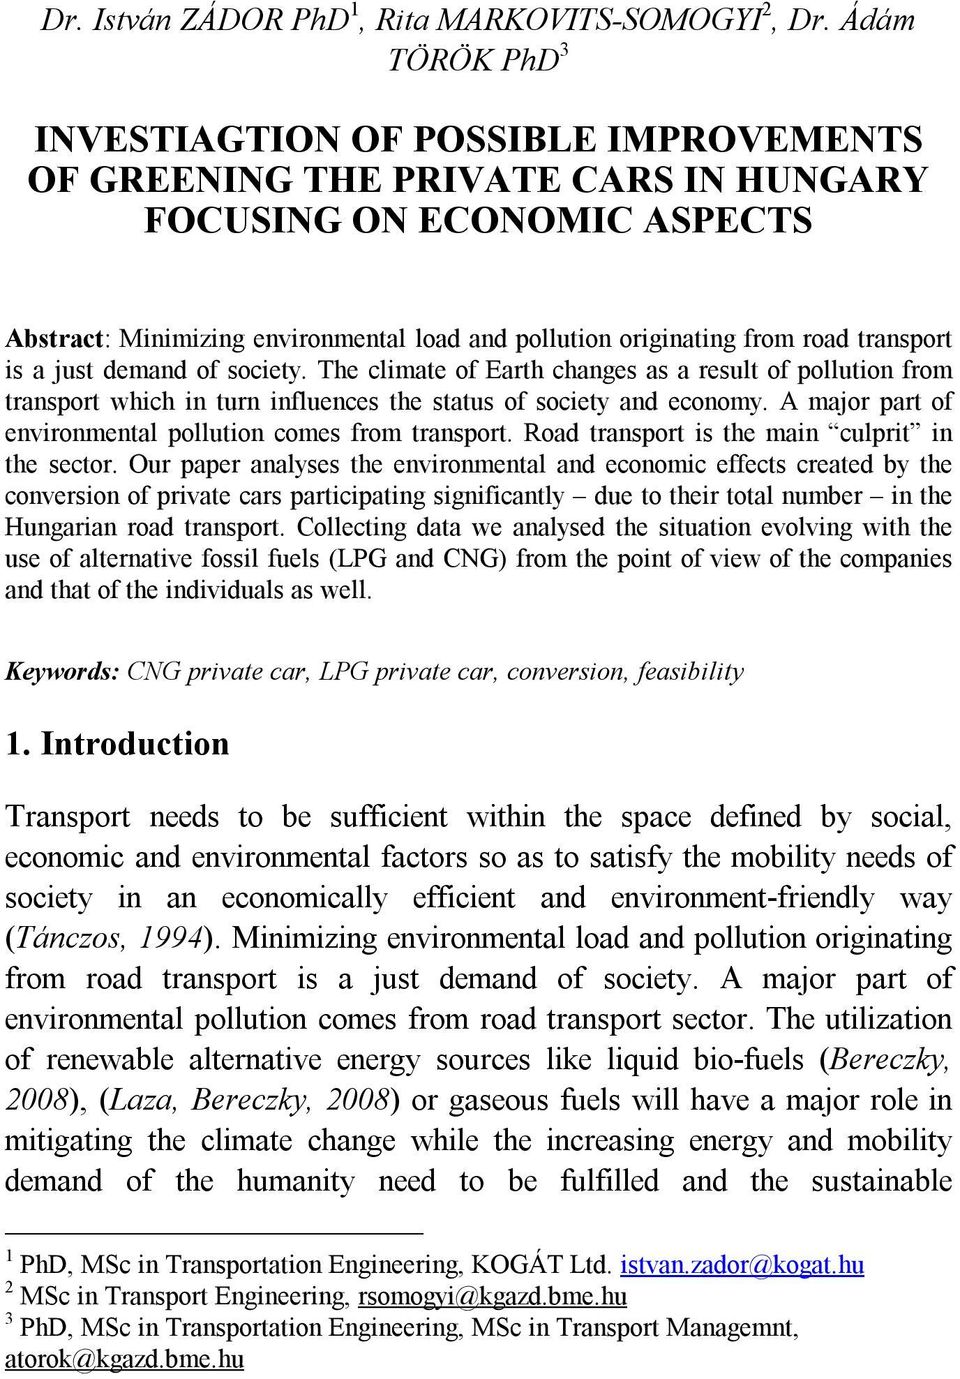 road transport is a just demand of society. The climate of Earth changes as a result of pollution from transport which in turn influences the status of society and economy.